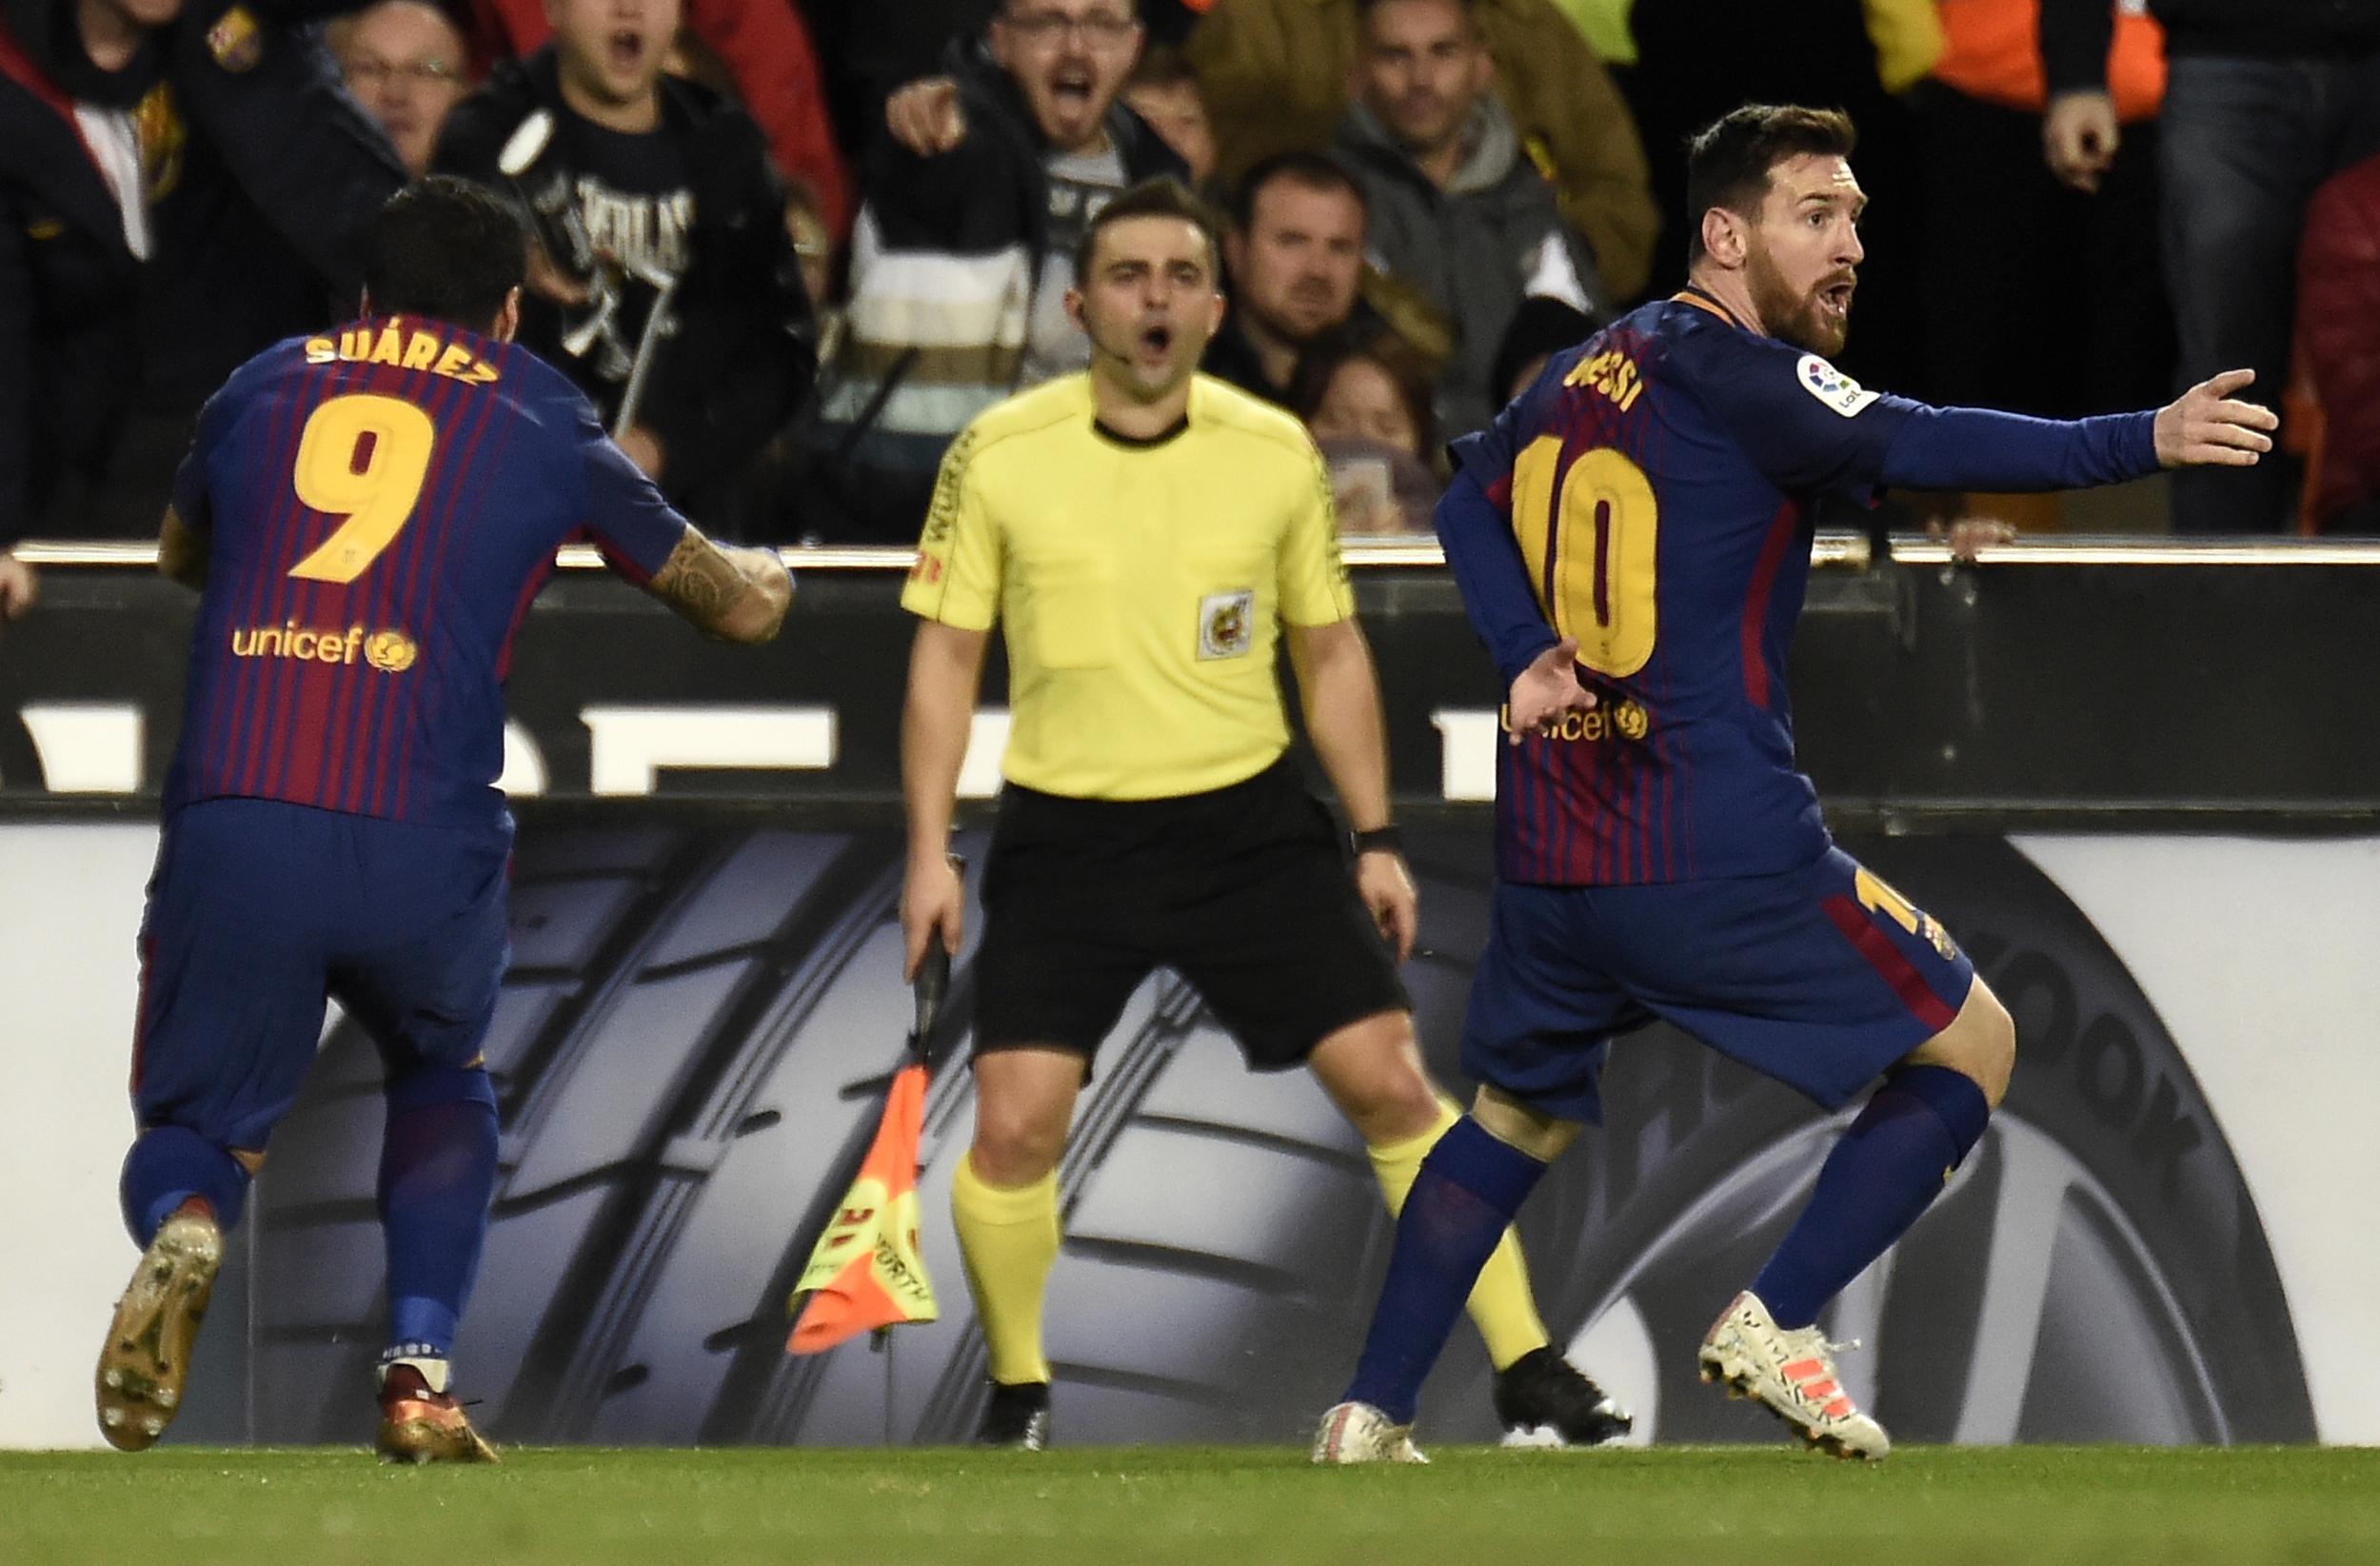 Lionel Messi could not believe his strike did not count